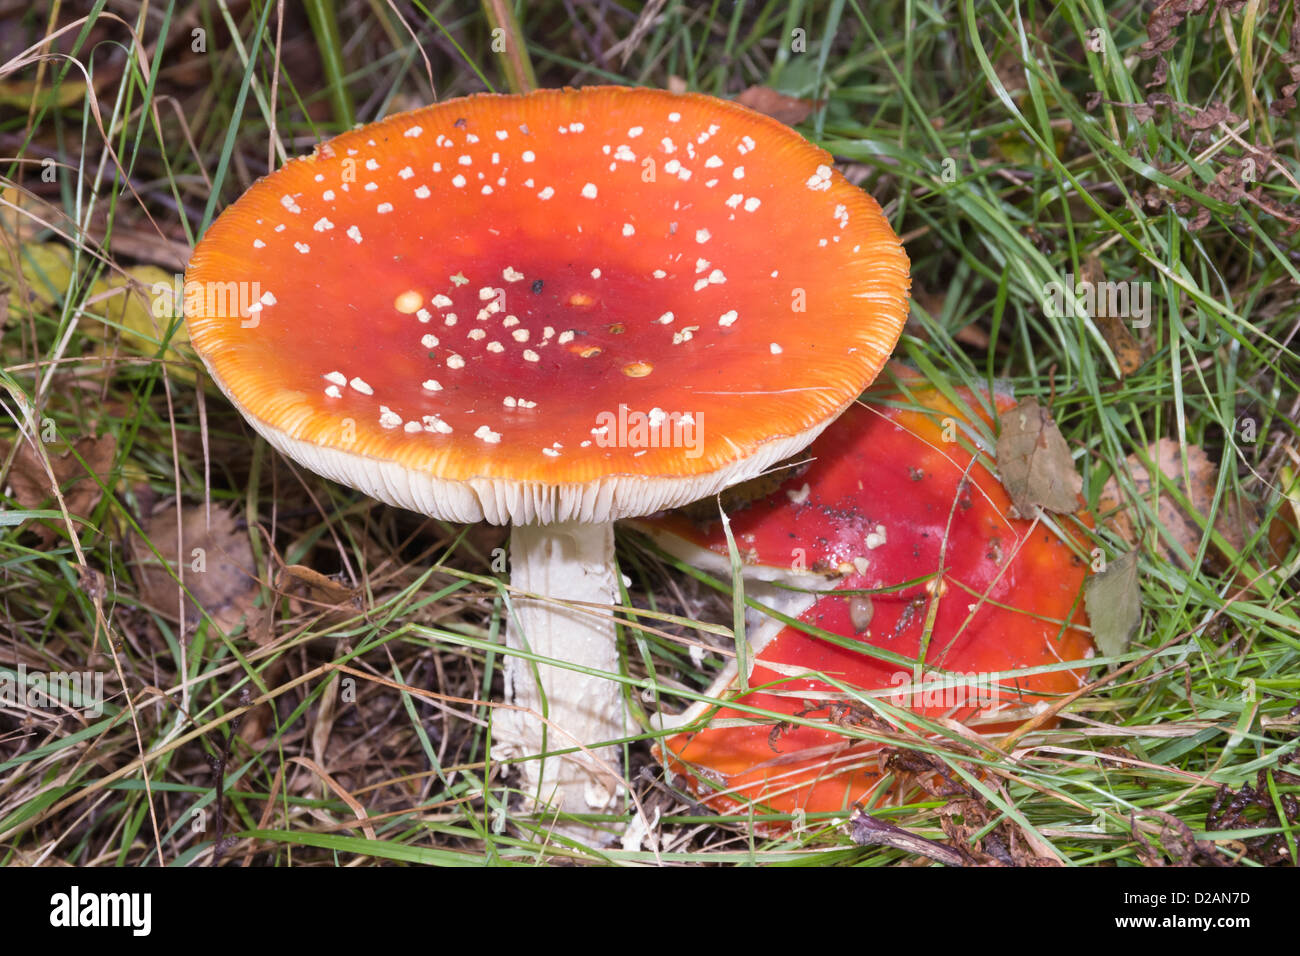 Close-up of a poisonous Fly Agaric (Amanita muscaria) toadstool fungus with red cap and white gills growing in grass. UK Stock Photo